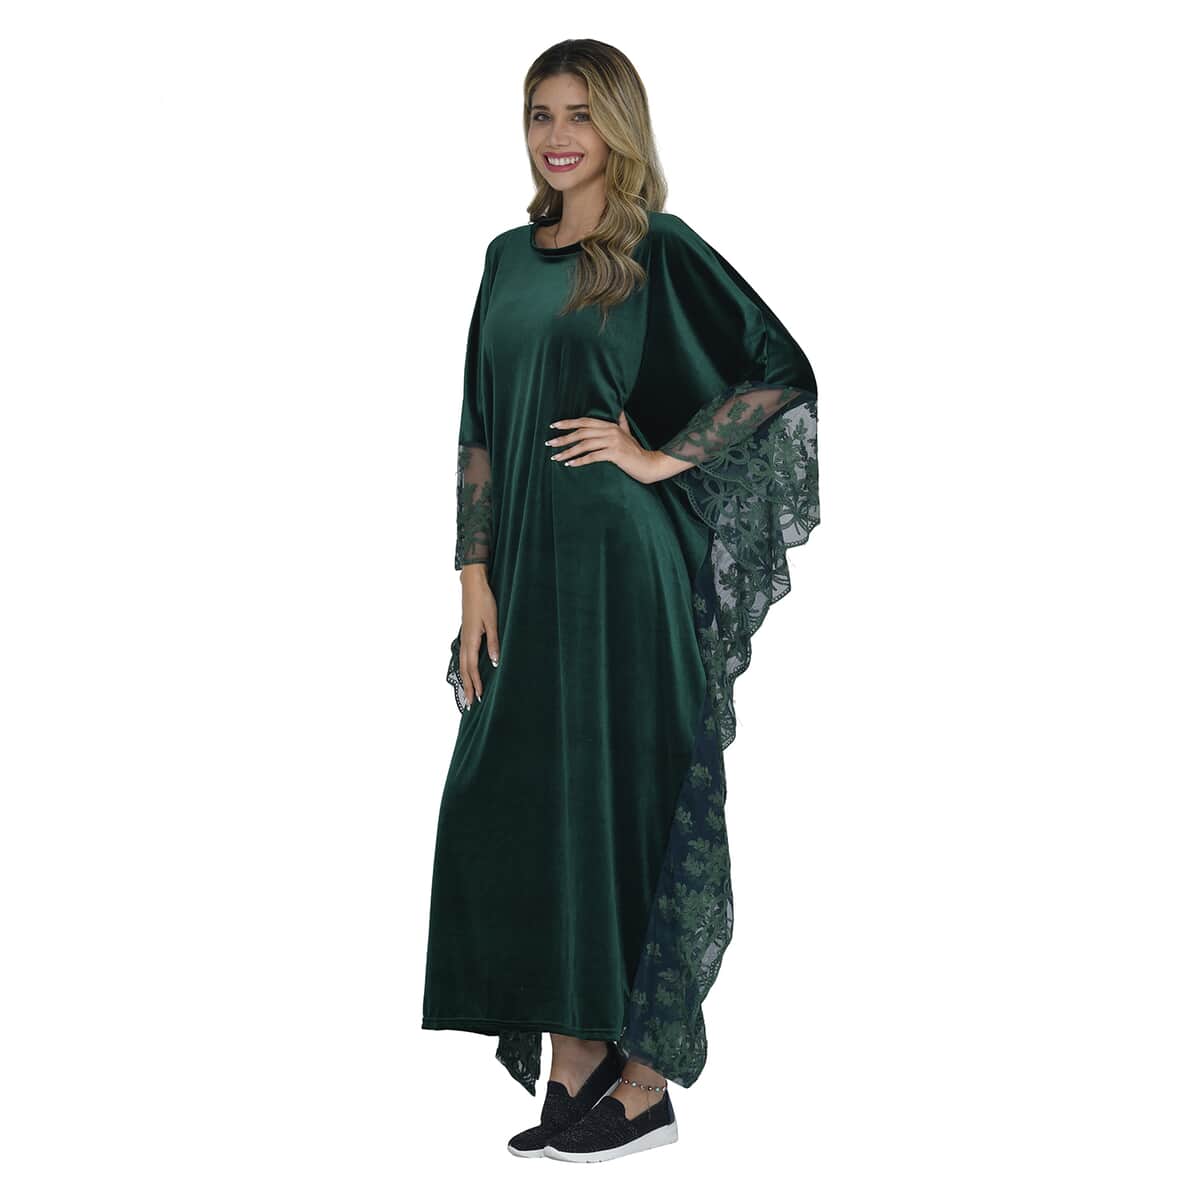 Tamsy Black Label - Lux Stretch Velvet Kaftan with Lace in Emerald Green - One Size Fits Most image number 2